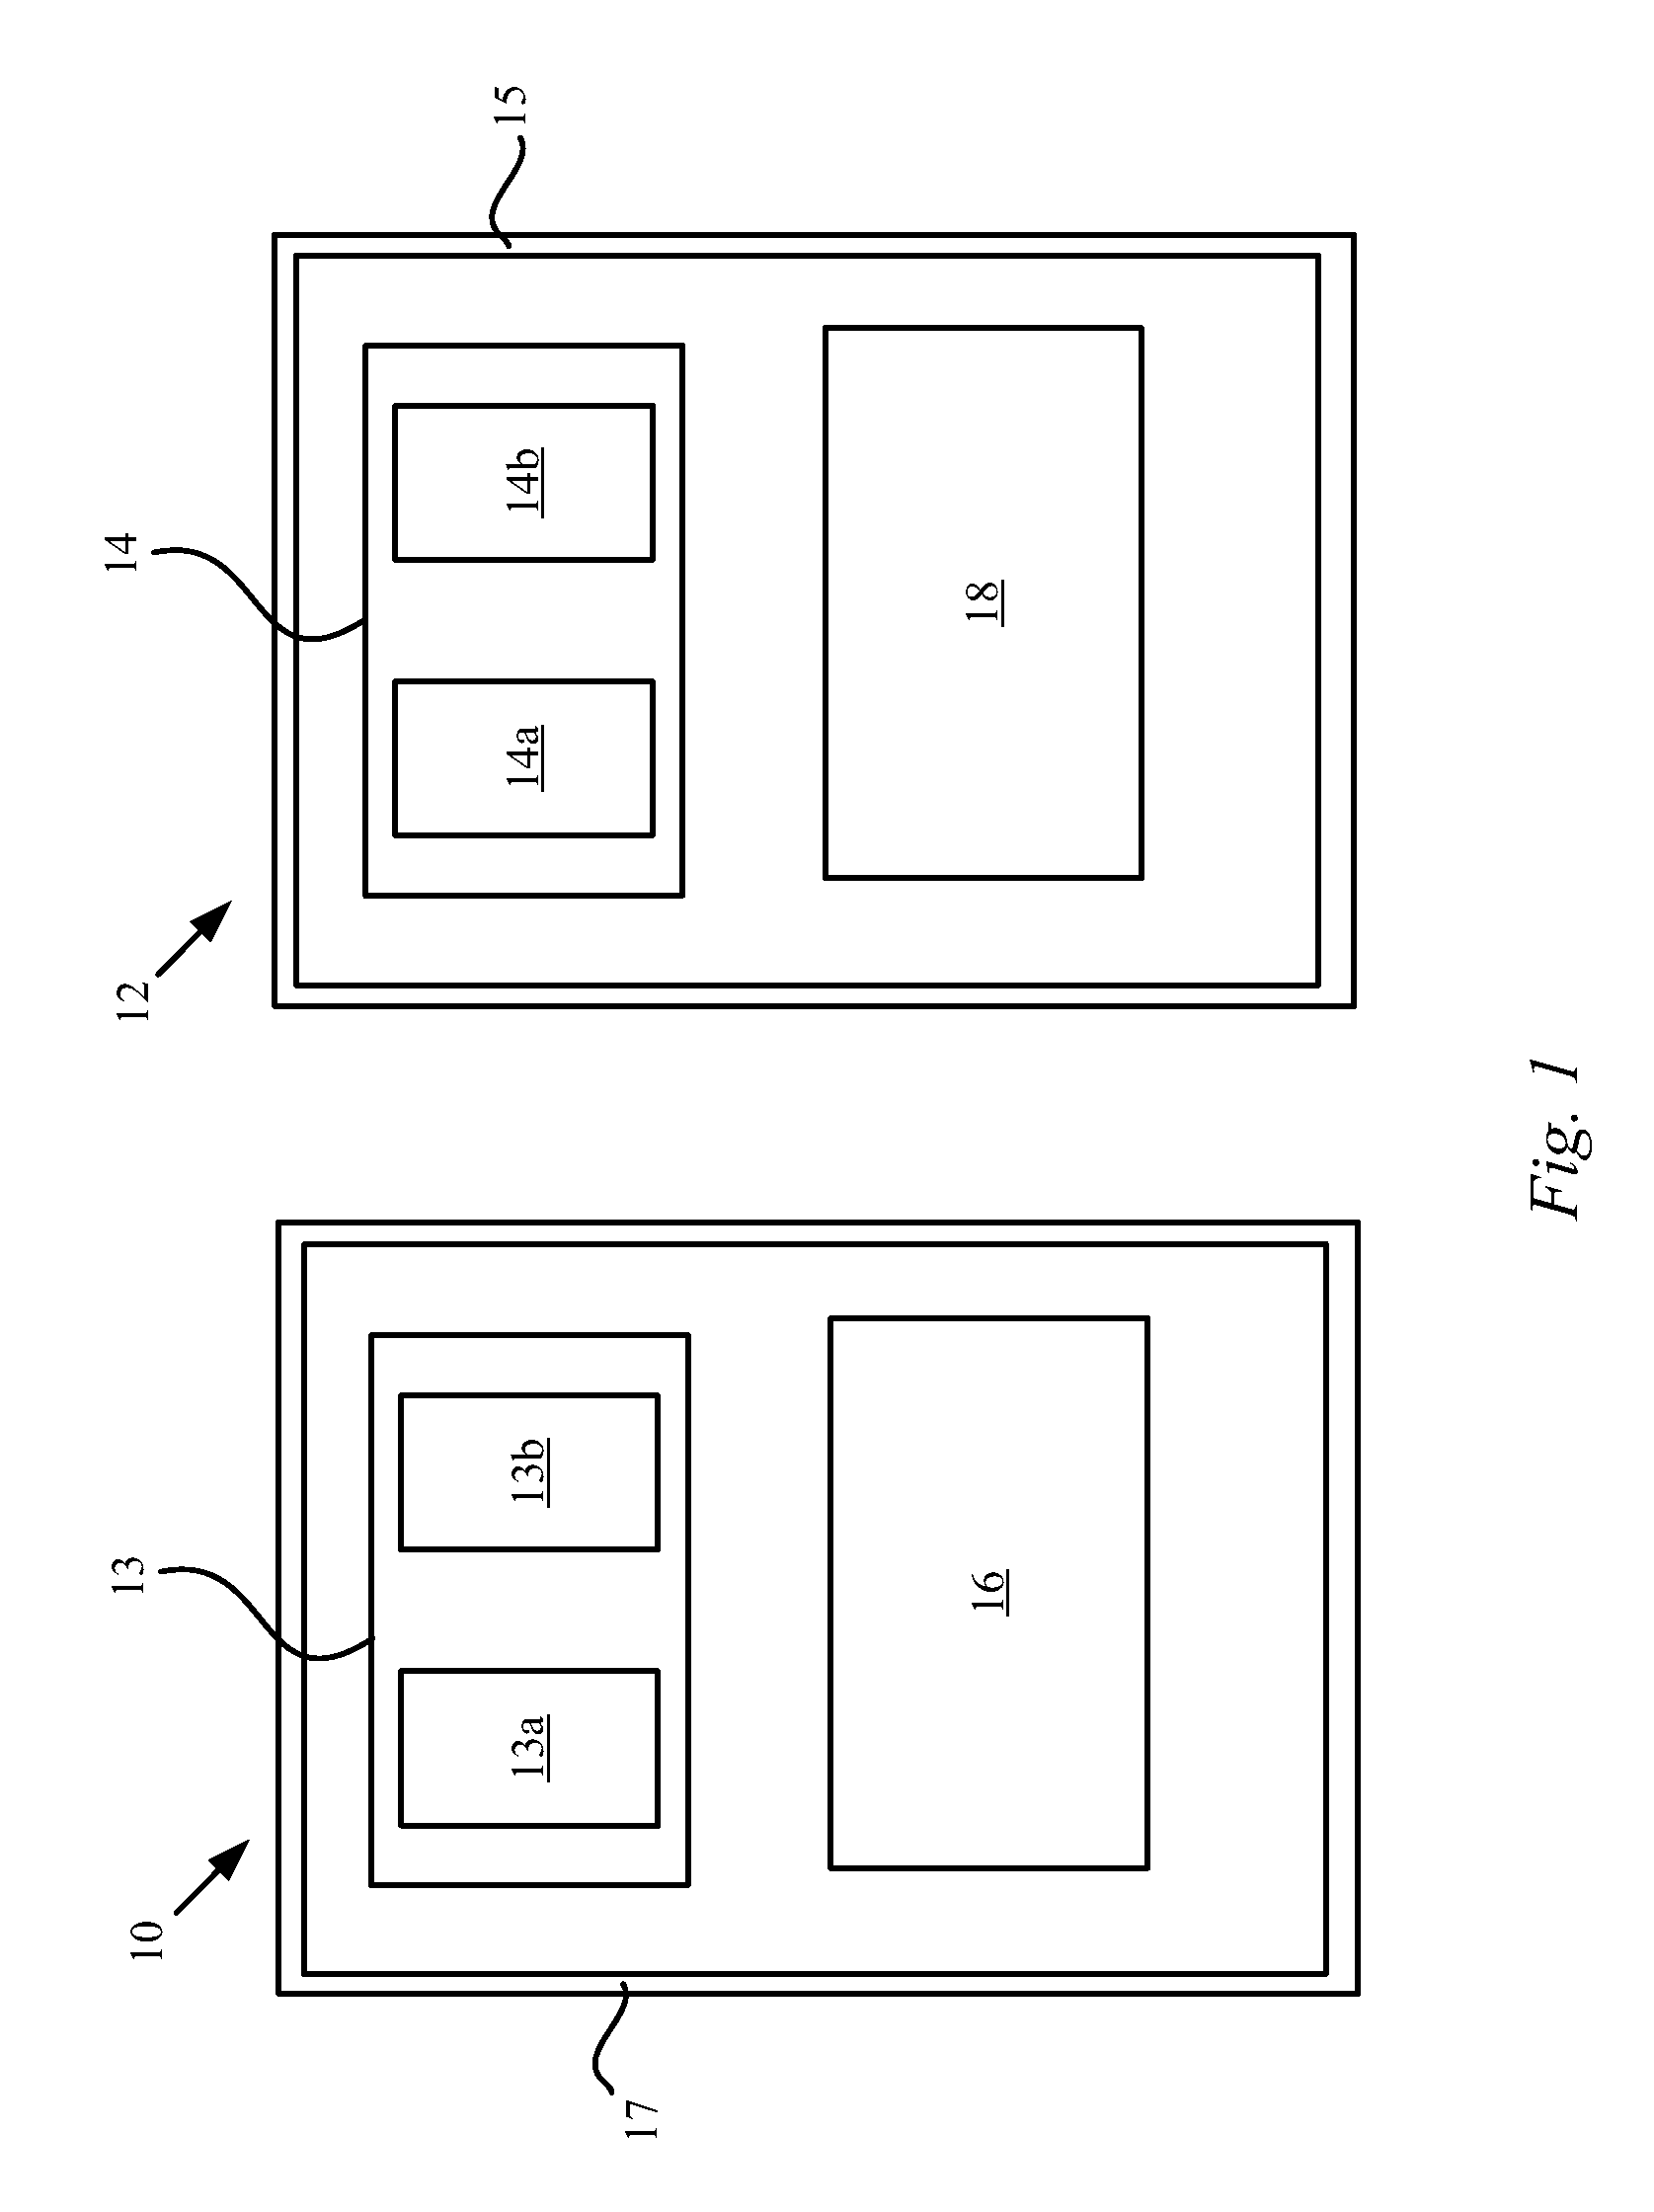 Accessory device with magnetic attachment